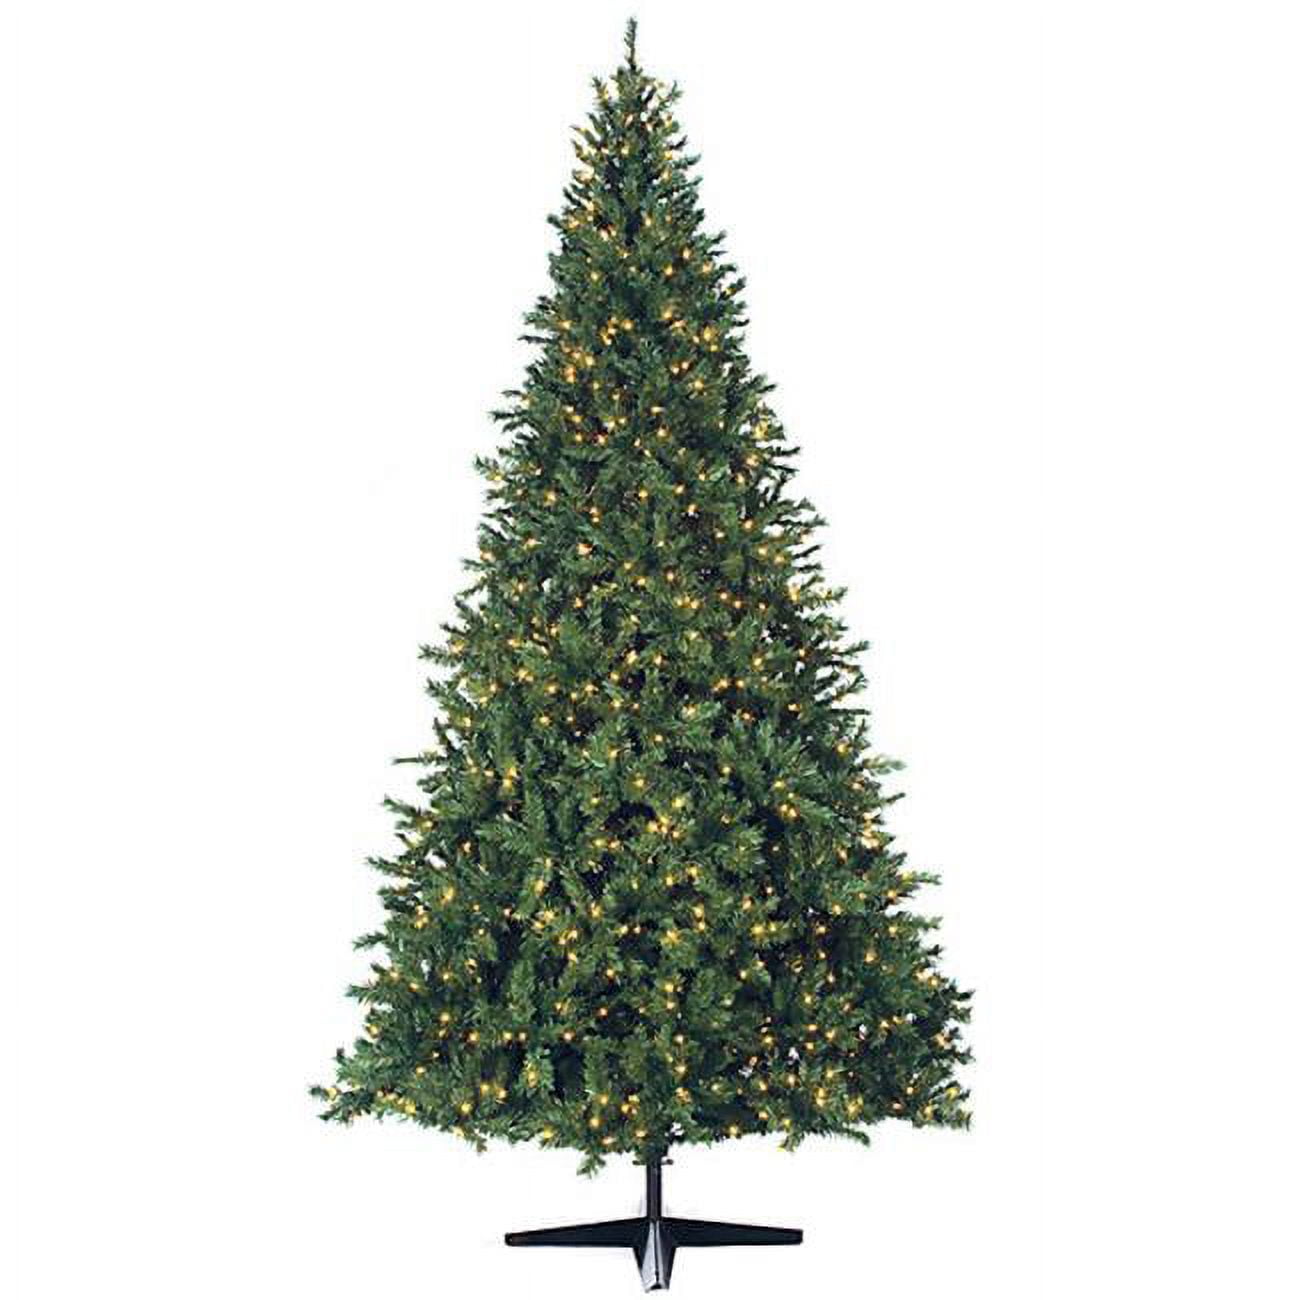 C-0210-1 7.5 Ft. Winchester Pine, Green